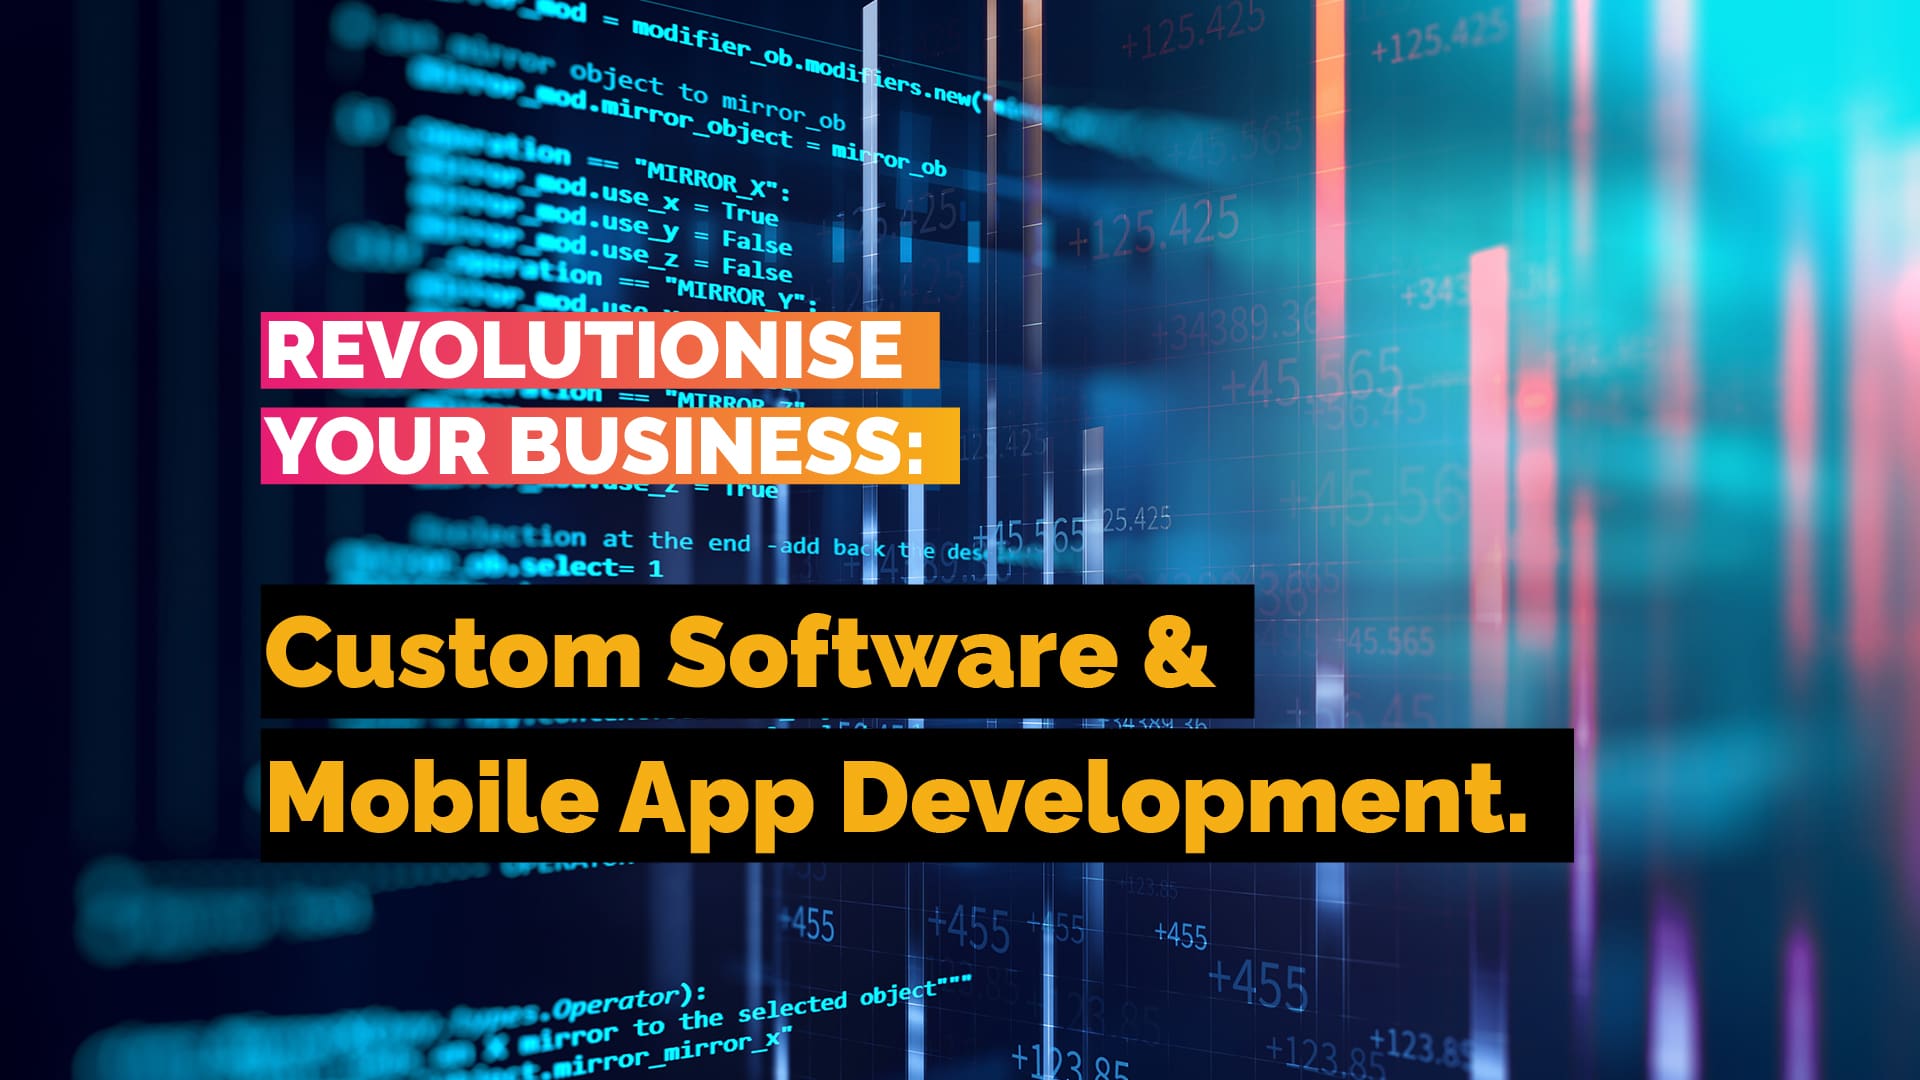 Revolutionise Your Business with Custom Software and Mobile App Development